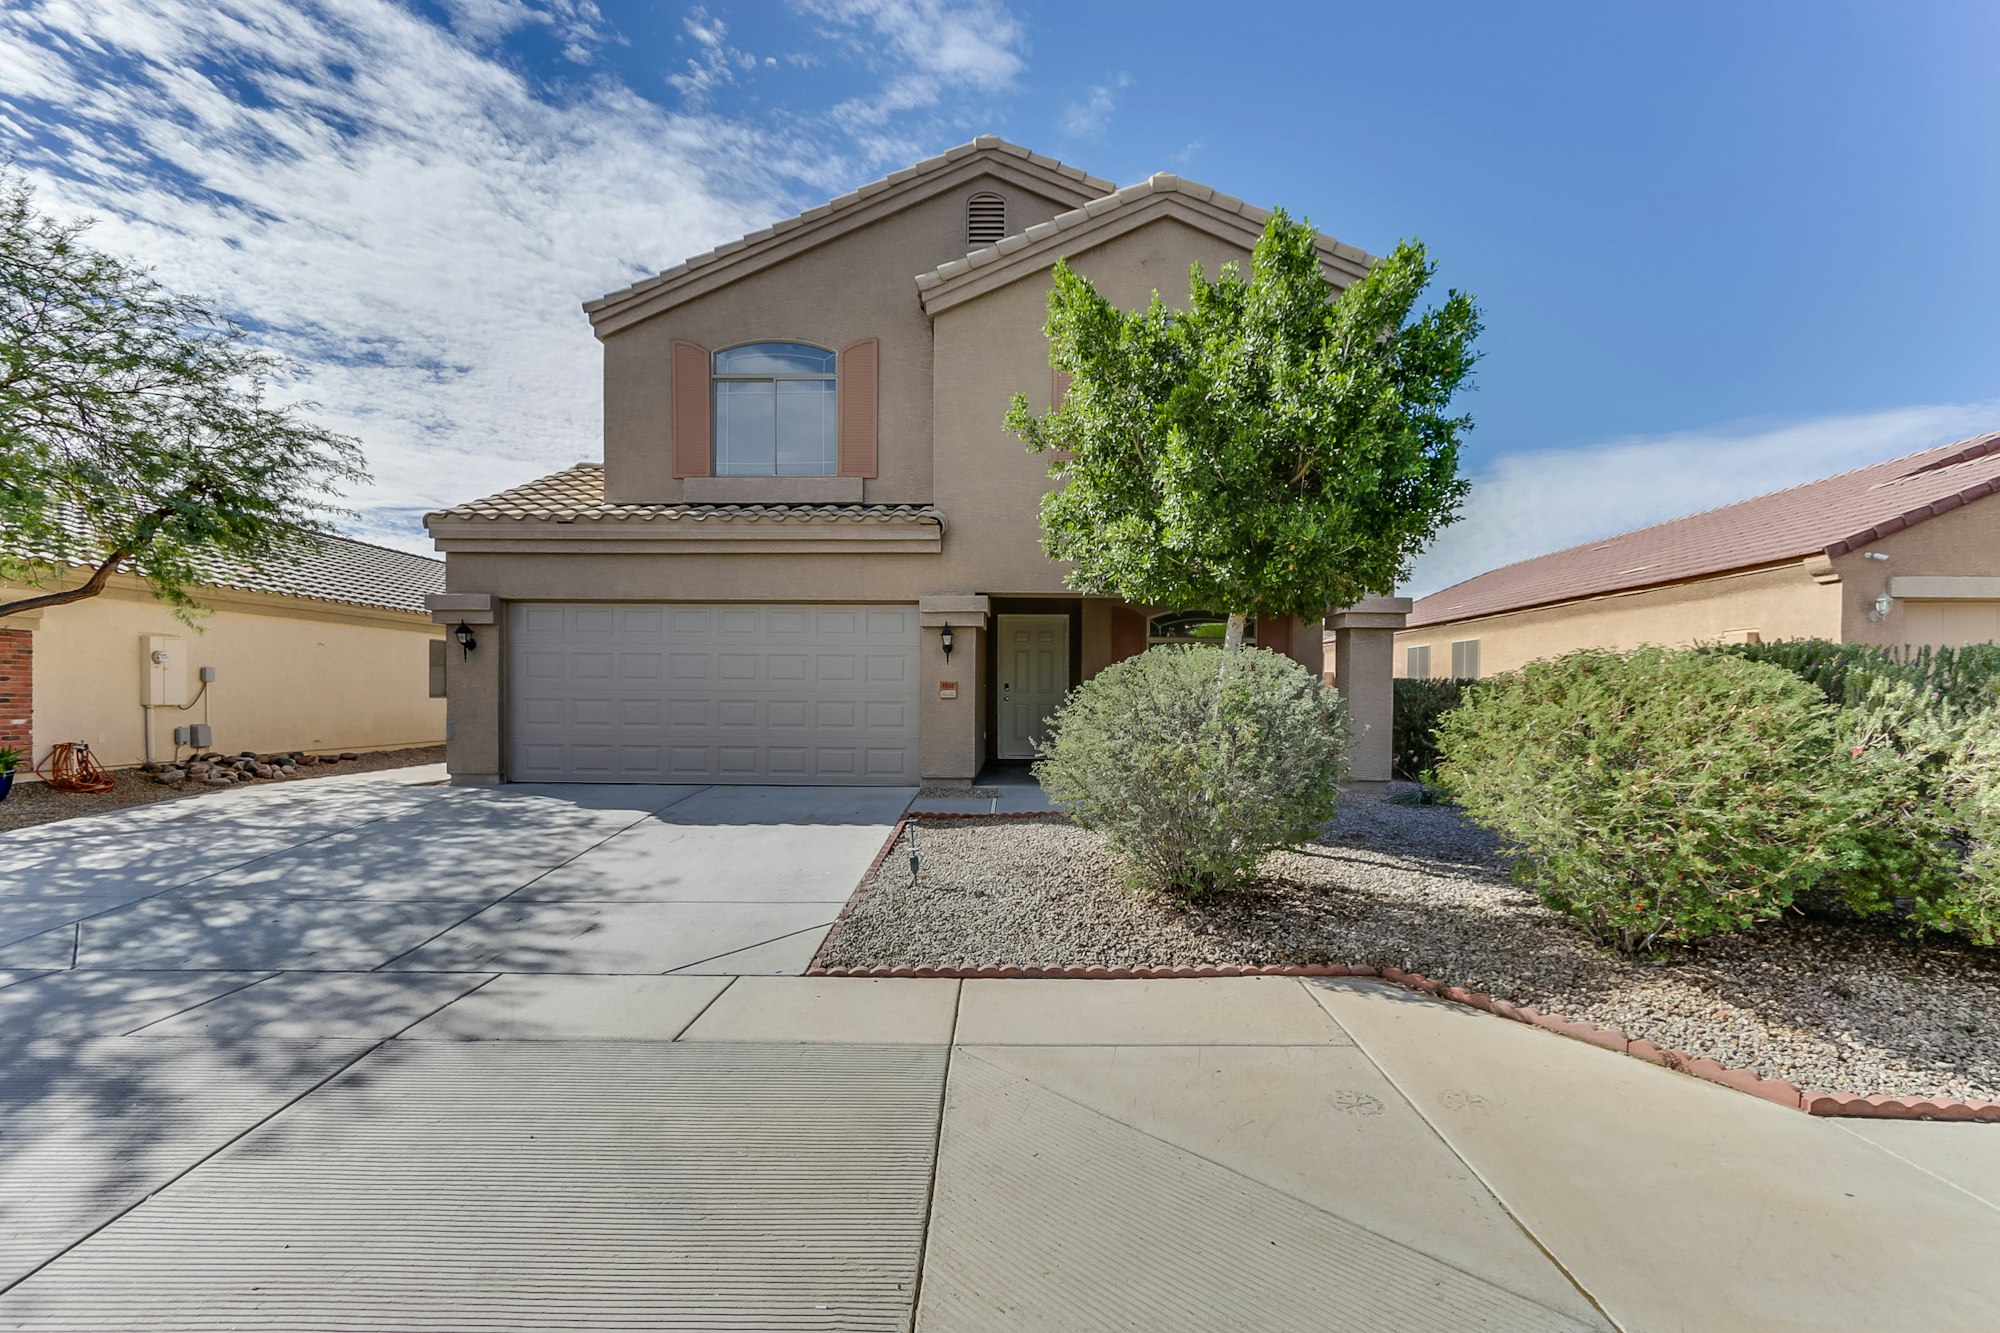 Photo 1 of 41 - 1830 S 106th Ave, Tolleson, AZ 85353